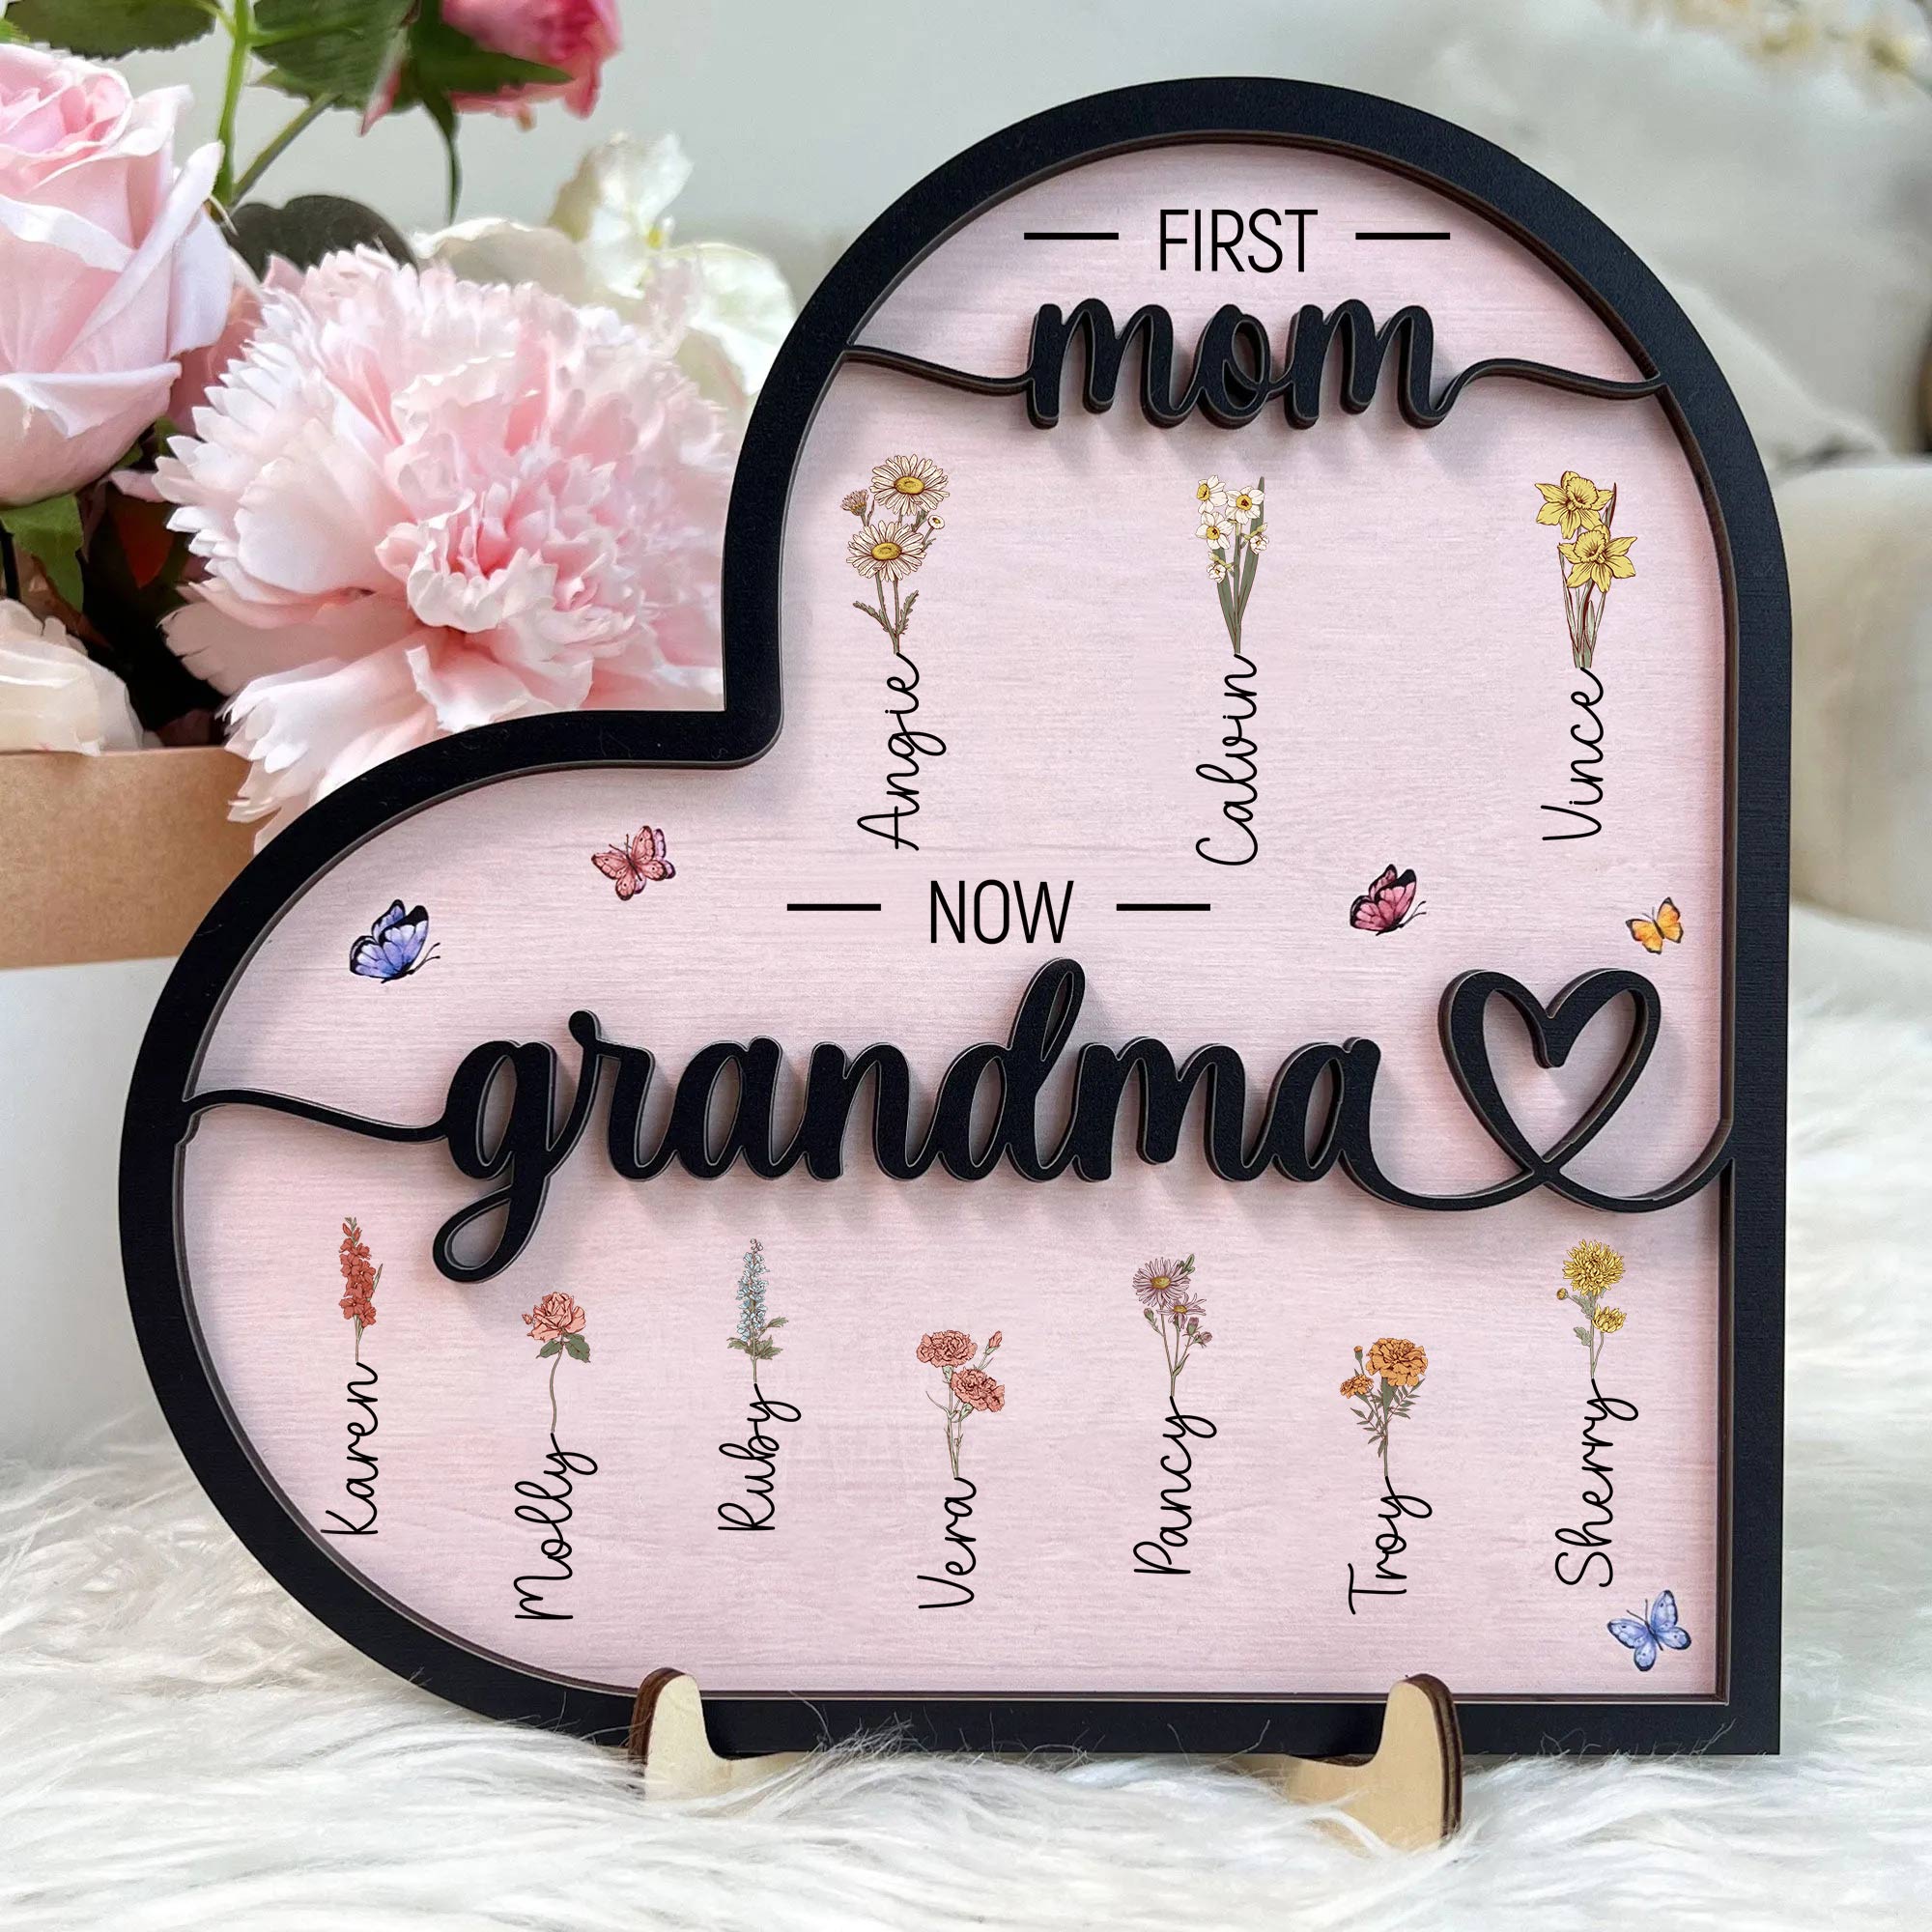 First Mom Now Grandma - Personalized Wooden Heart Plaque